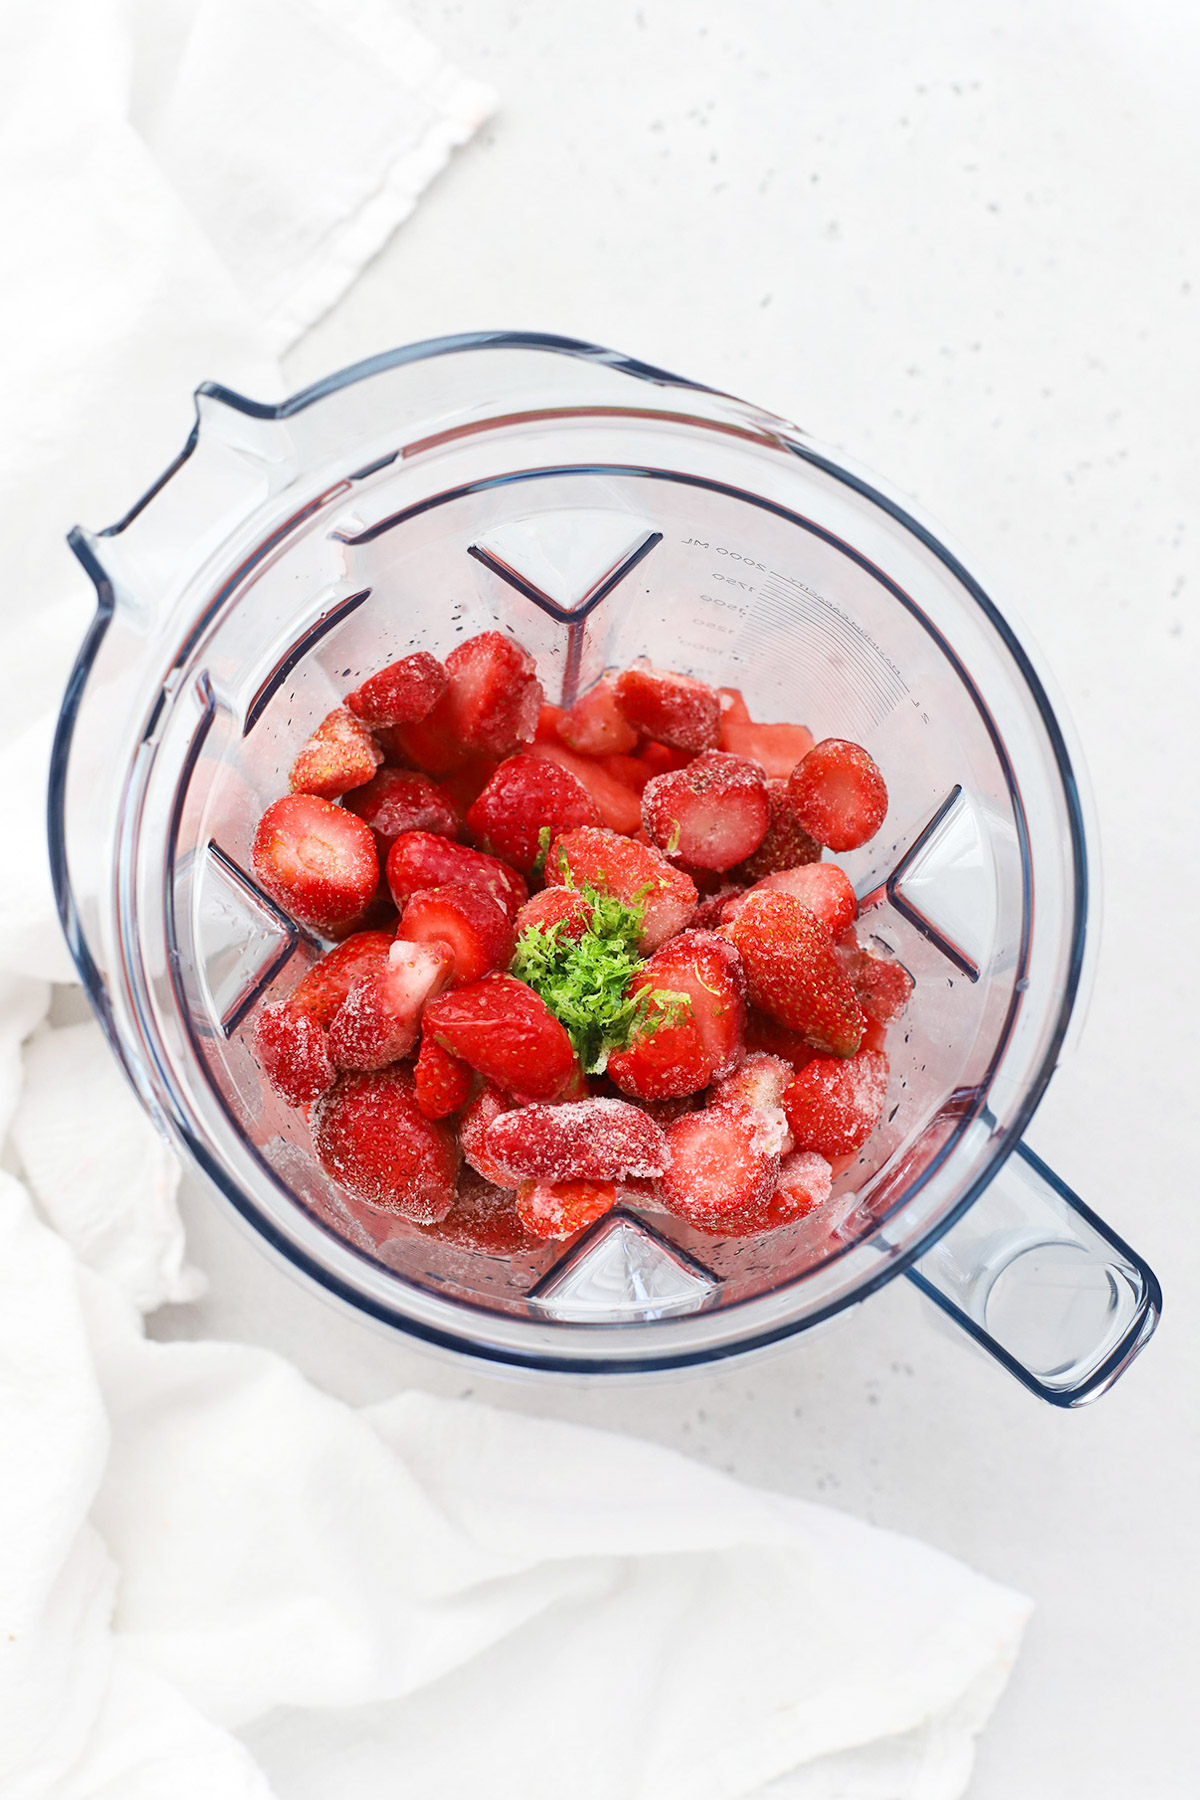 Ingredients for strawberry watermelon smoothies in a blender